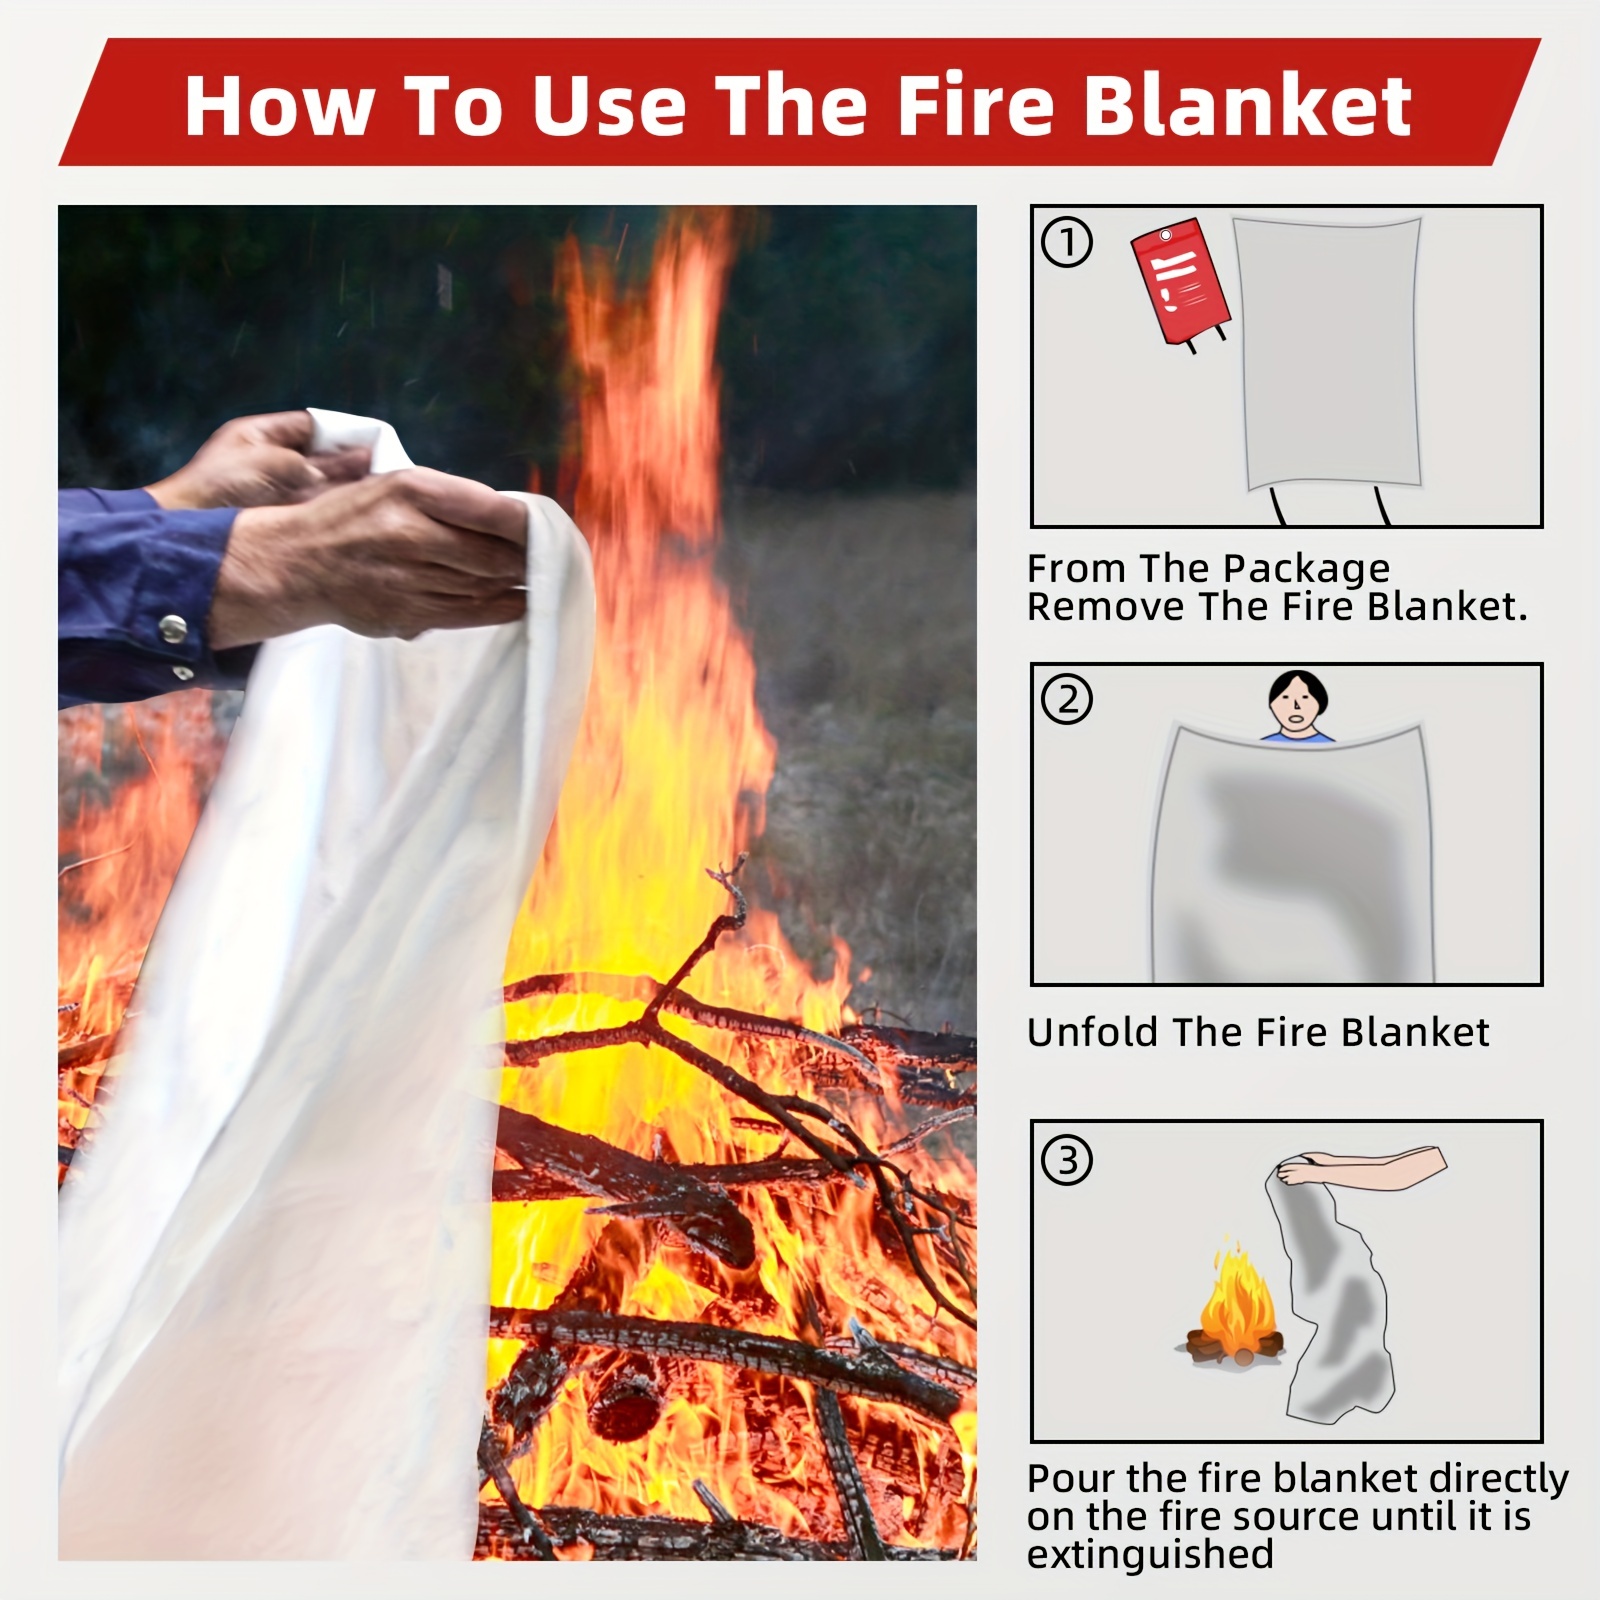 Emergency Fire Blanket for Home and Kitchen Fire Extinguishers for